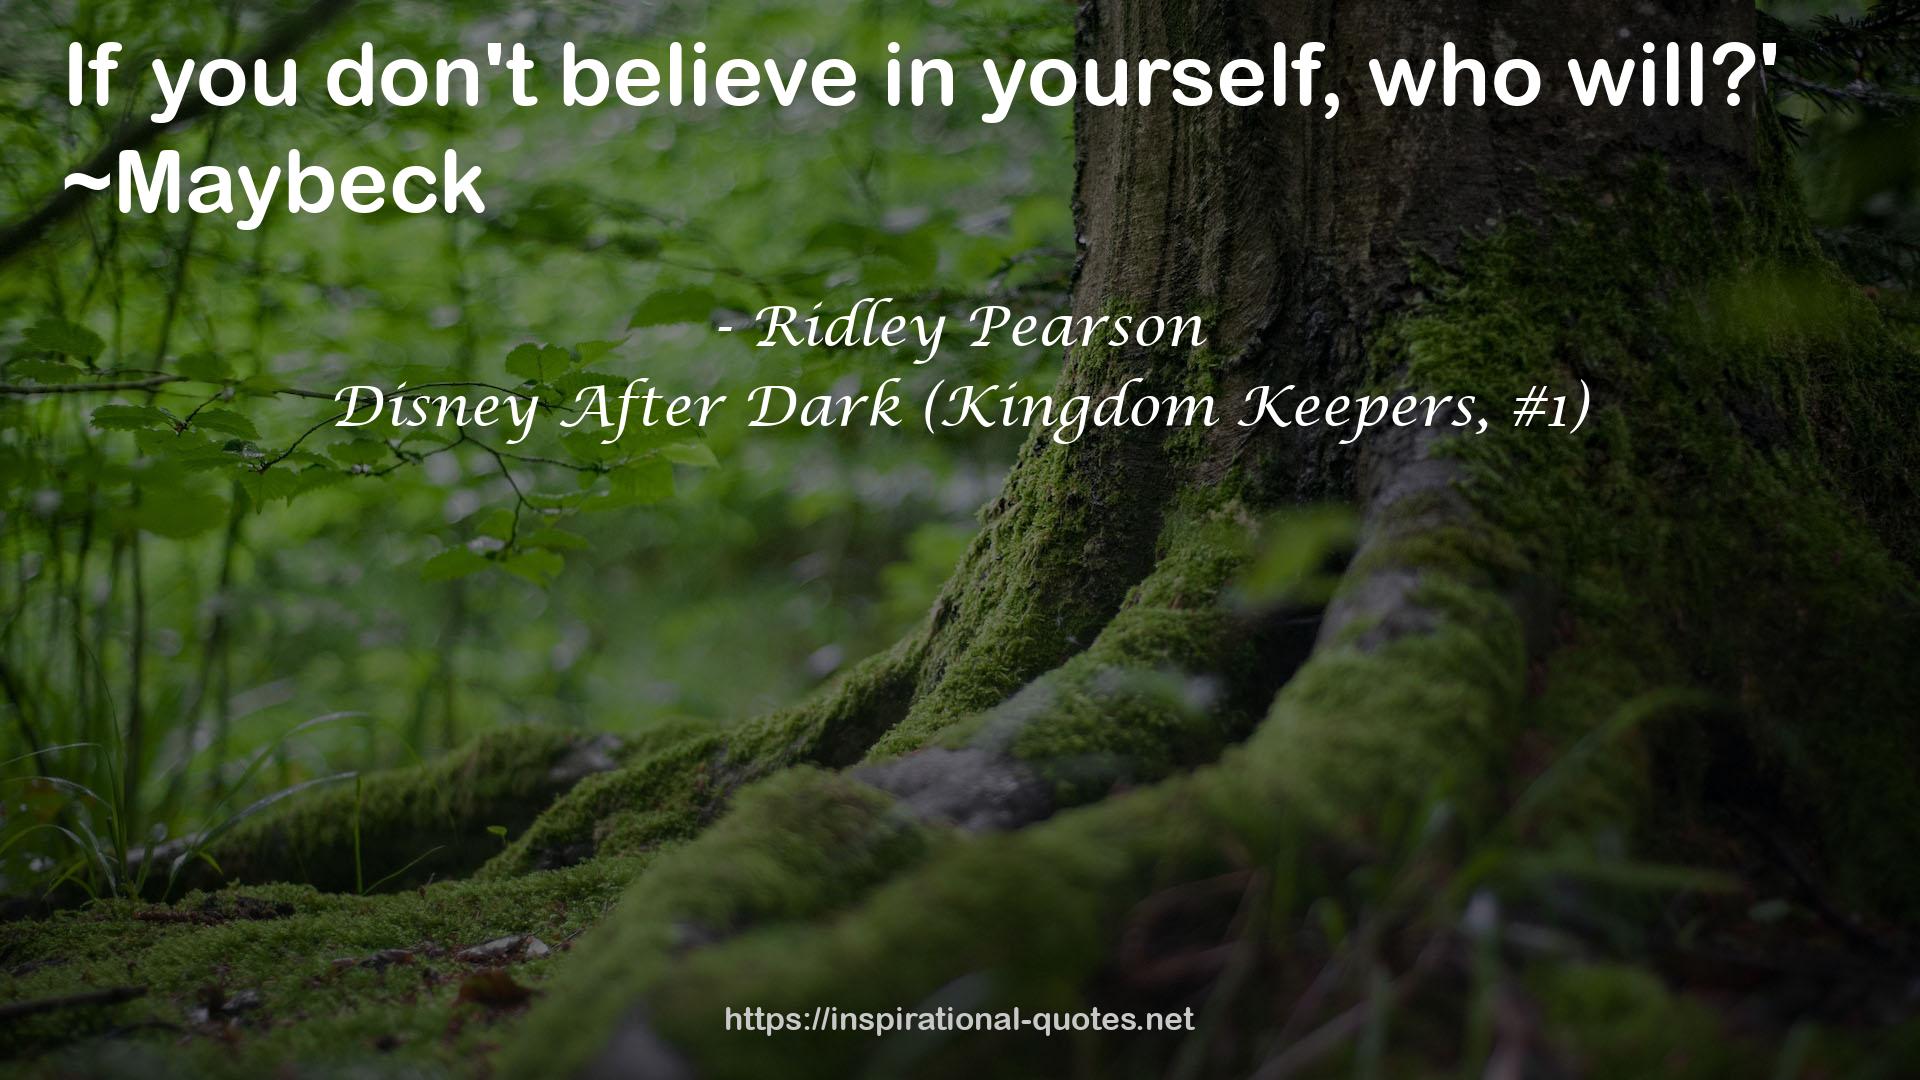 Disney After Dark (Kingdom Keepers, #1) QUOTES